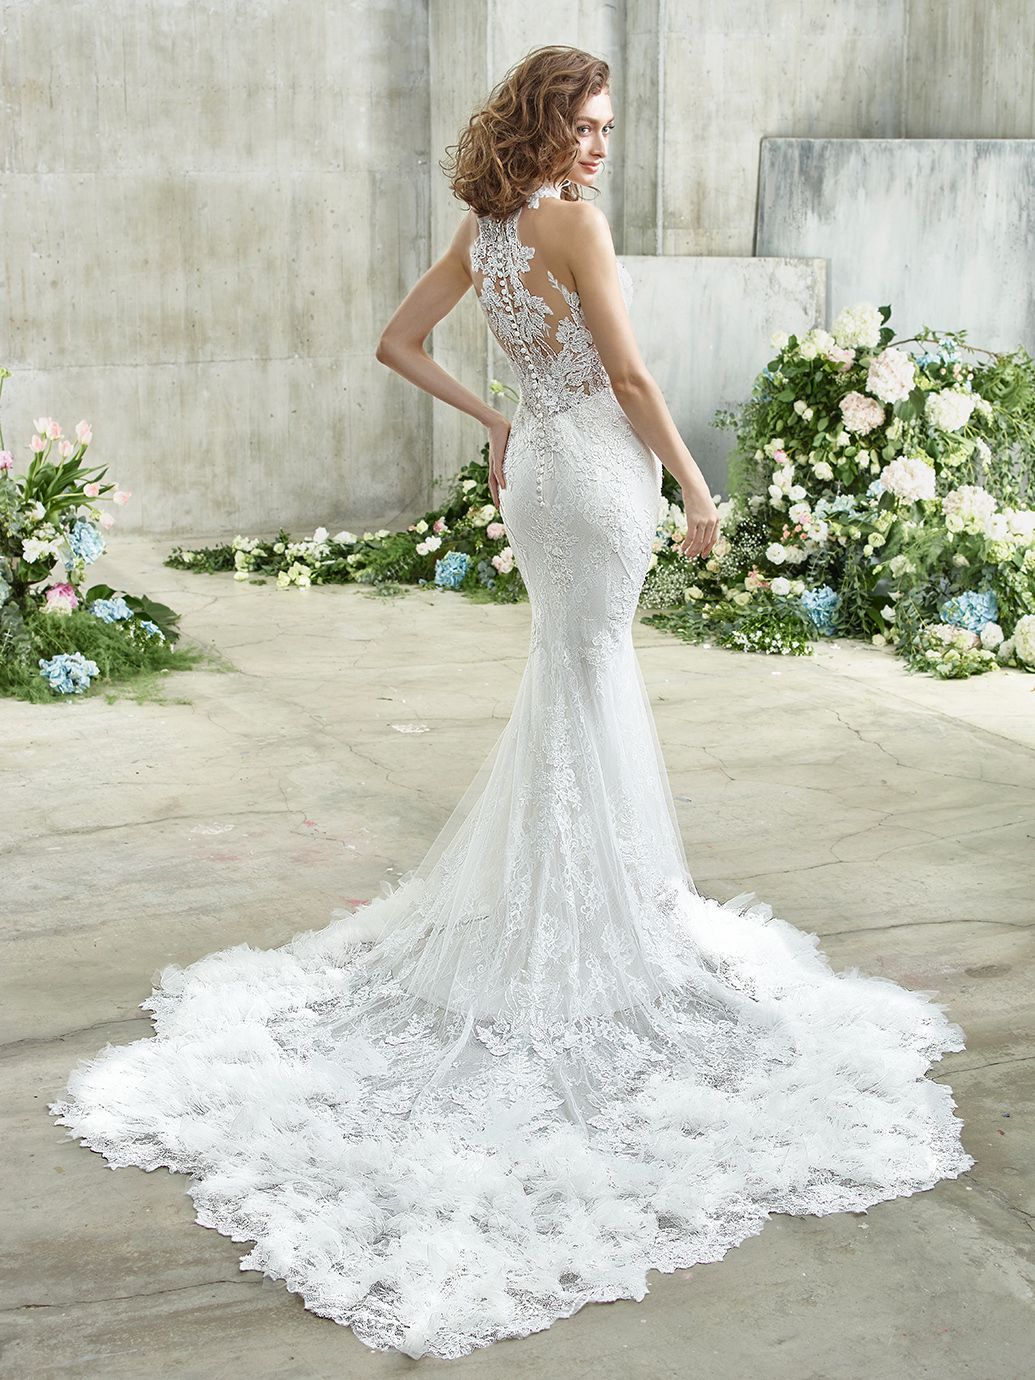 Holmes and Co Bridal Couture-Image-46